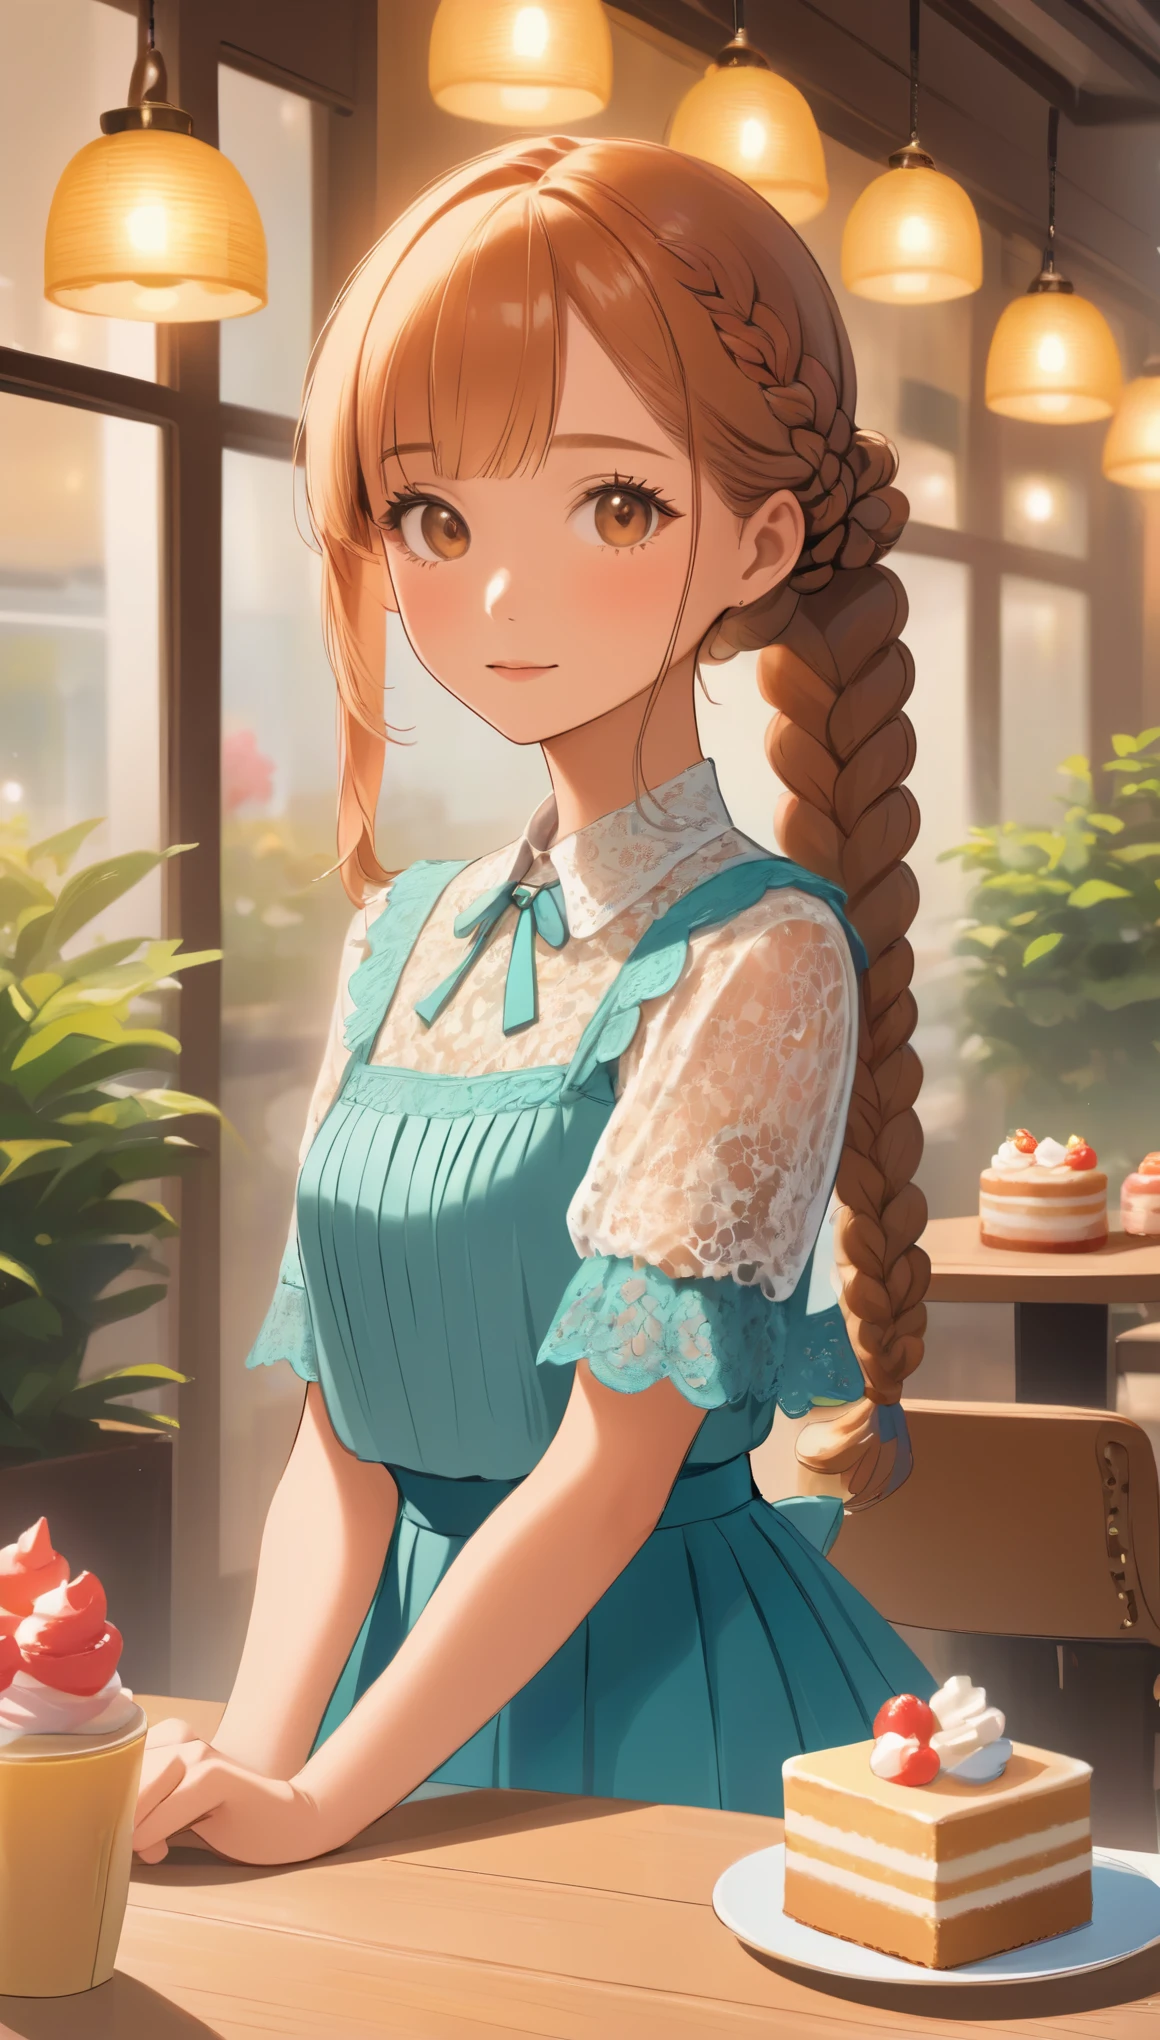 highest quality、High resolution、detailed background、beautiful face、beautiful and smooth skin、skin texture、cuteteenage girl、realistic、perfect body line、braided ponytail、cute hairstyle、Calm atmosphere、happy look、Upper body、Tea time at the cafe、(Enjoy cakes and sweets while chatting at a cute cafe:1.5)、Choose white or pastel colors for lace tops and flared skirts..、sandals or heels、If lace tops are transparent, You can wear it elegantly by layering it with an inner camisole...、Choose a lace blouse in a soft color and add feminine movement with a pleated skirt.Adding lace to the sleeves and collar of the blouse makes it even more cute.、Choose a colorful lace camisole、Add elegance with a midi skirt。、cute、master piece:1.5、